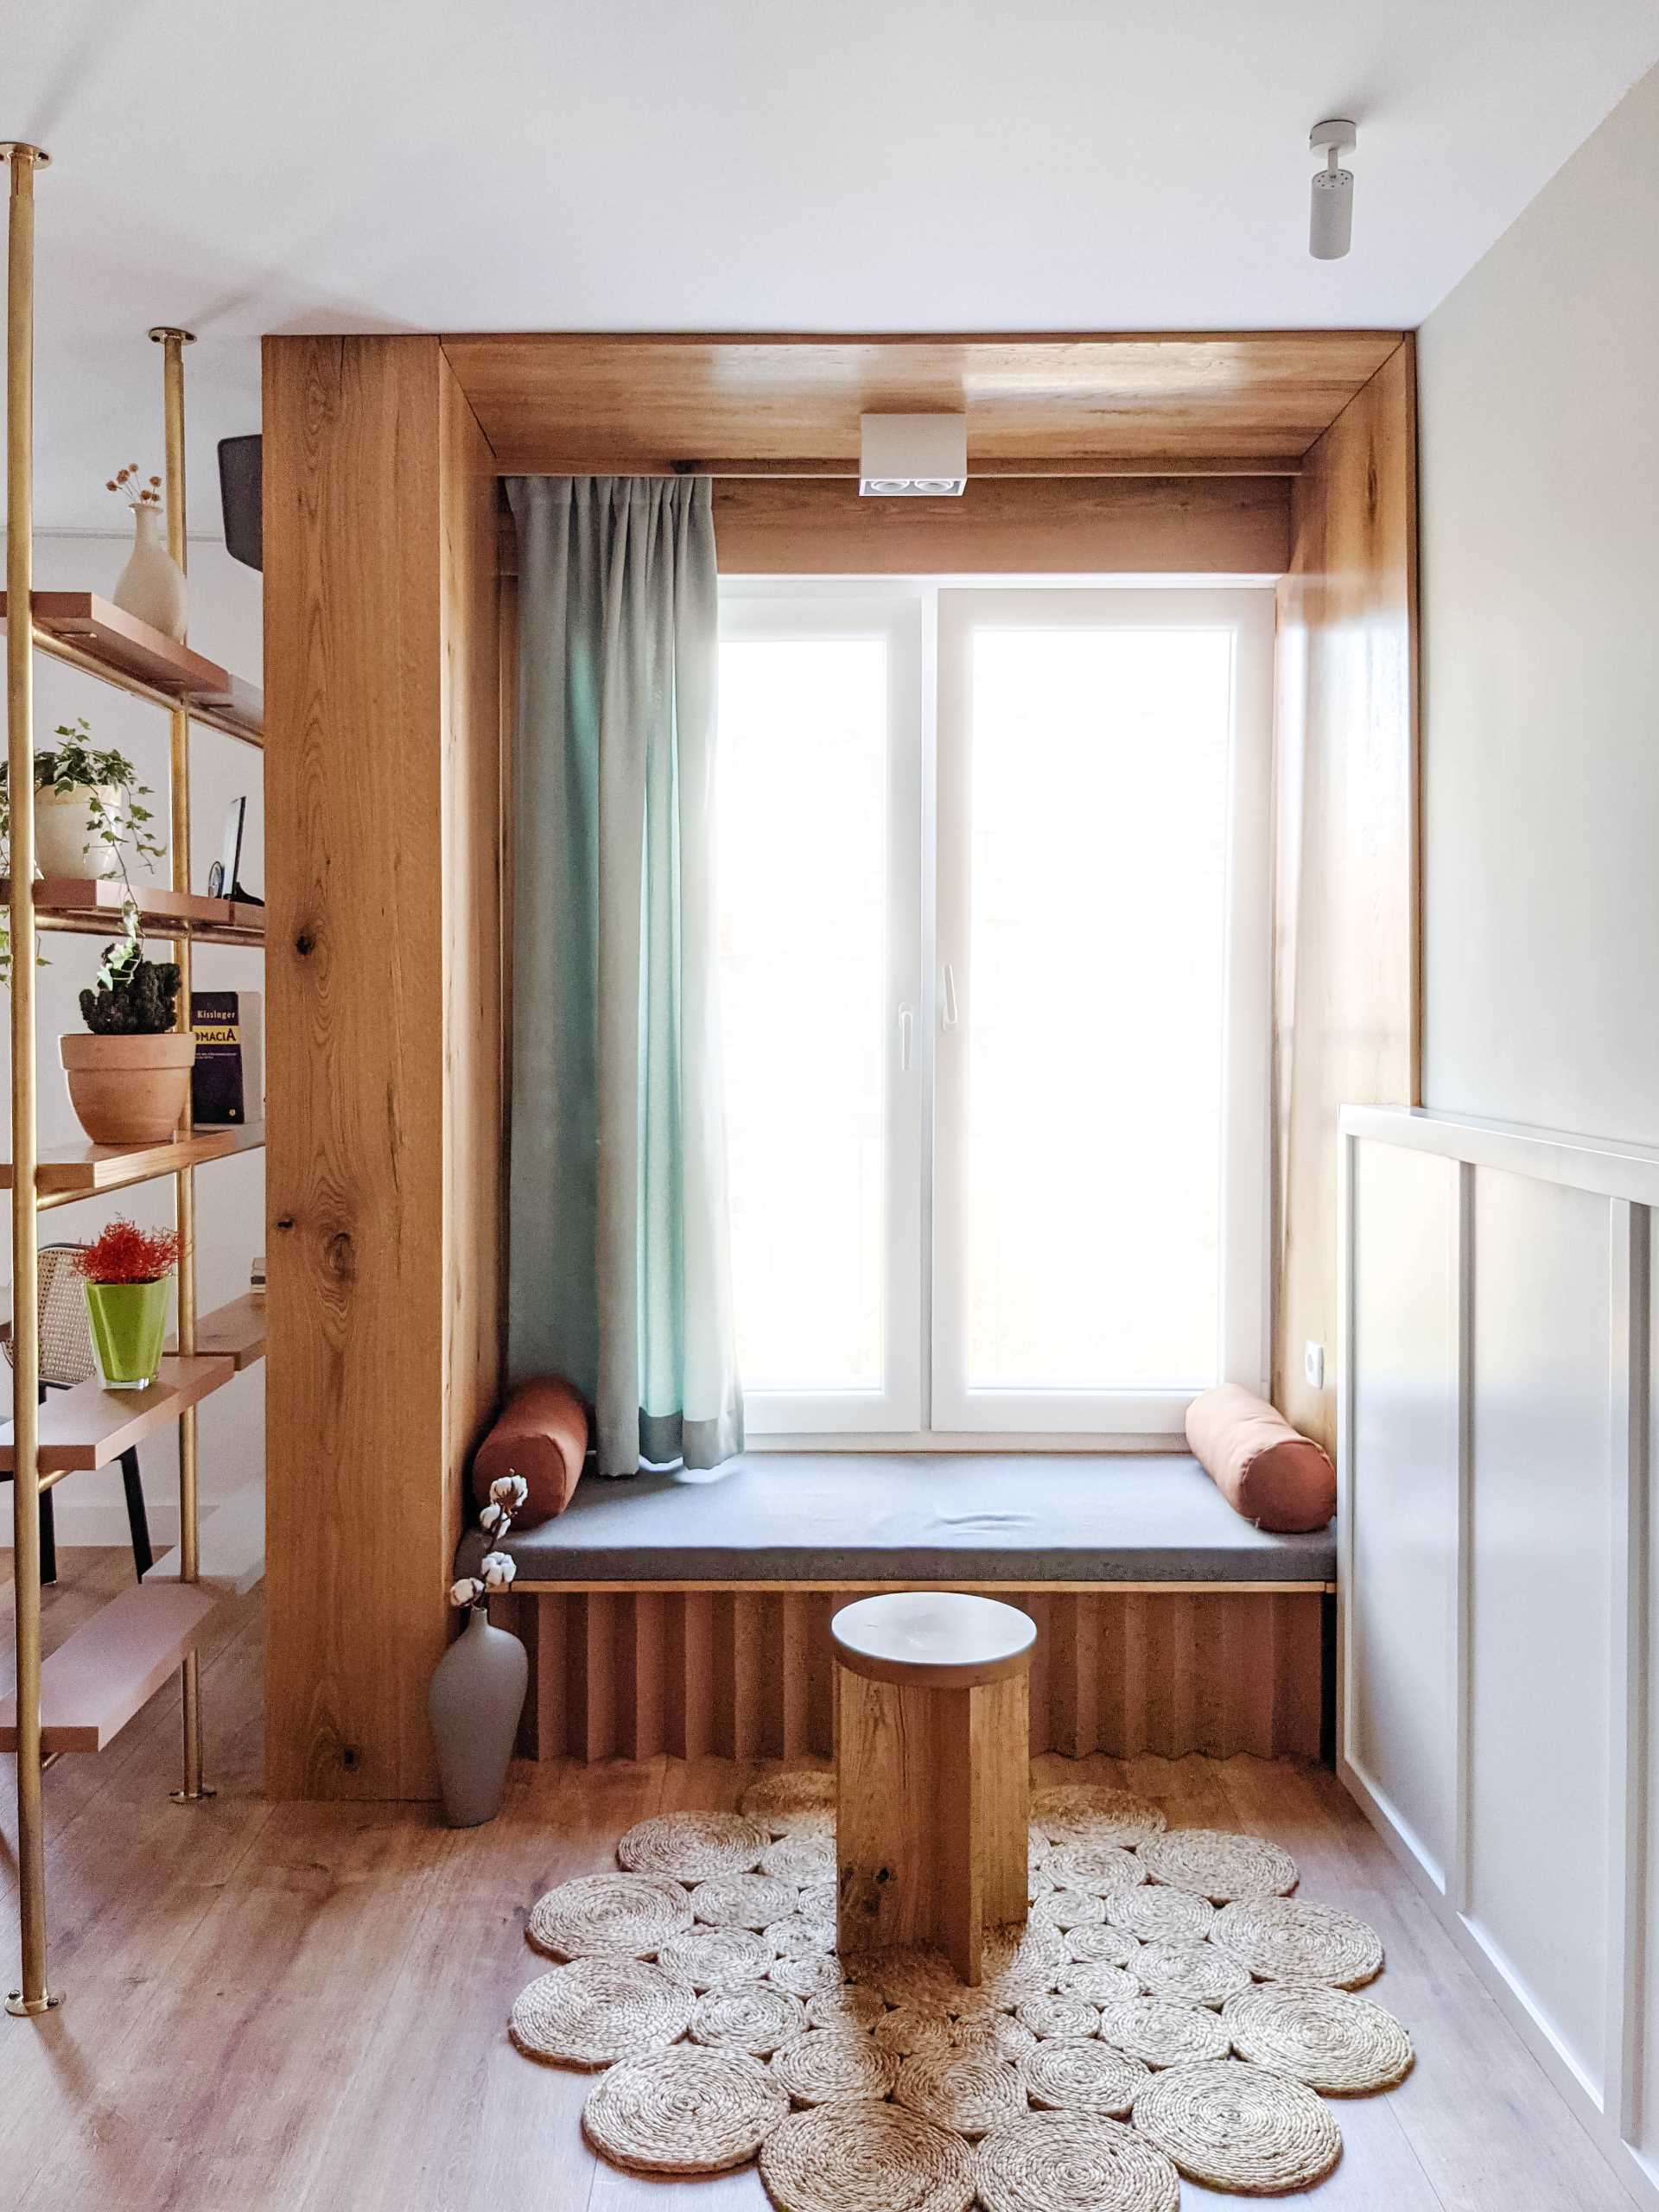 A built-in window seat lined with wood.